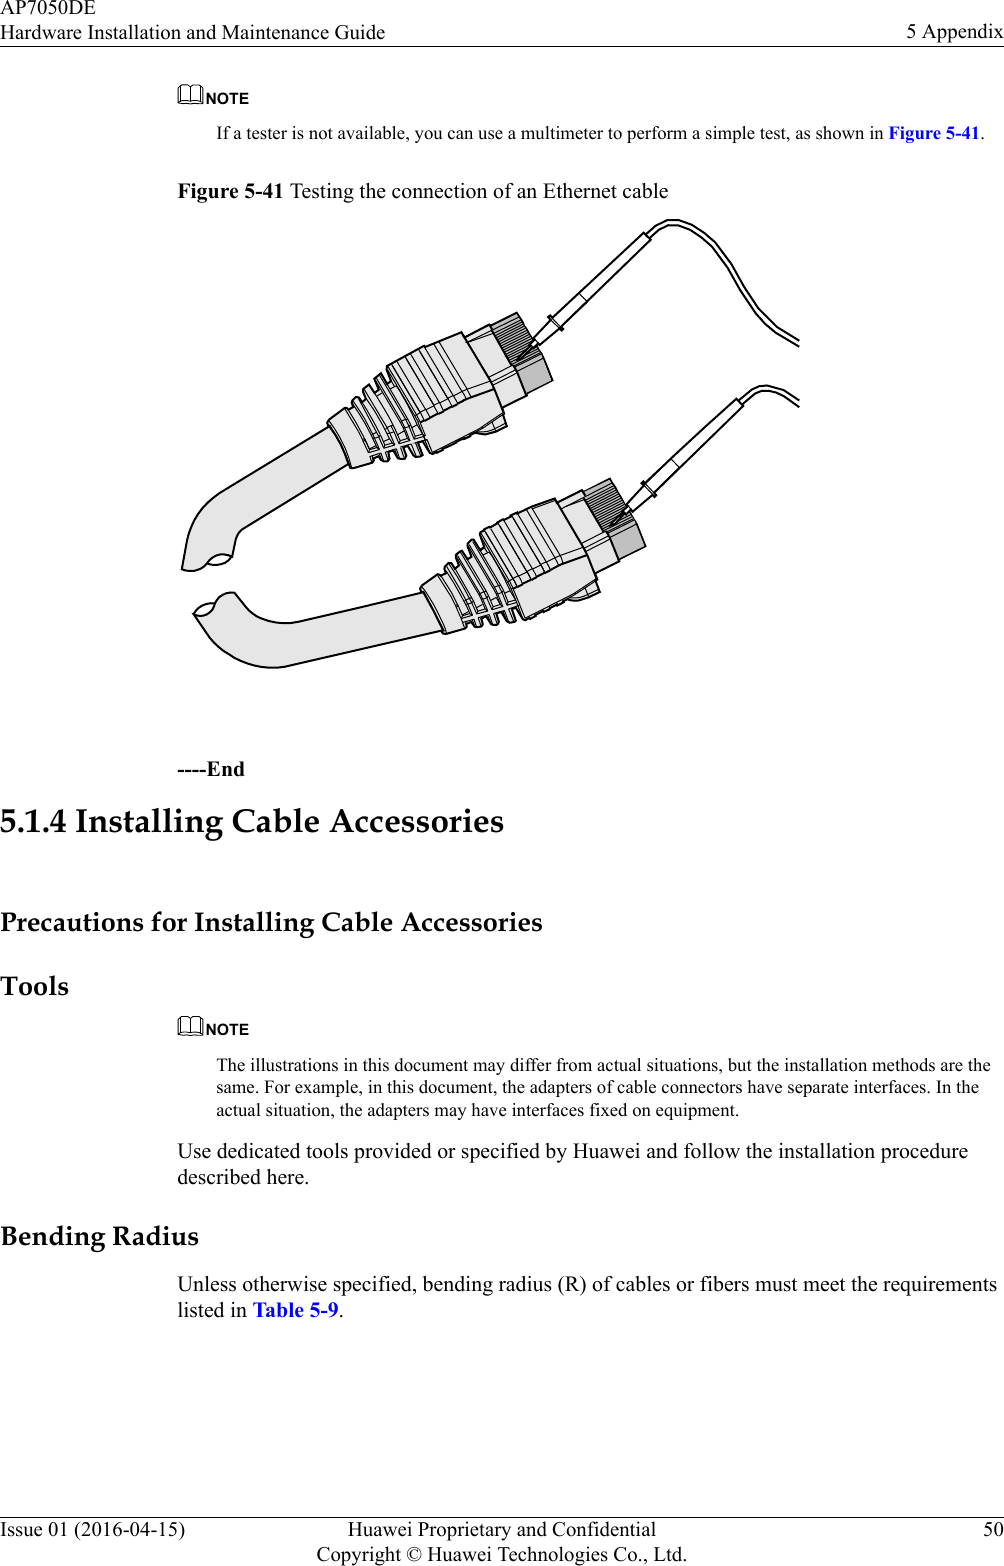 NOTEIf a tester is not available, you can use a multimeter to perform a simple test, as shown in Figure 5-41.Figure 5-41 Testing the connection of an Ethernet cable ----End5.1.4 Installing Cable AccessoriesPrecautions for Installing Cable AccessoriesToolsNOTEThe illustrations in this document may differ from actual situations, but the installation methods are thesame. For example, in this document, the adapters of cable connectors have separate interfaces. In theactual situation, the adapters may have interfaces fixed on equipment.Use dedicated tools provided or specified by Huawei and follow the installation proceduredescribed here.Bending RadiusUnless otherwise specified, bending radius (R) of cables or fibers must meet the requirementslisted in Table 5-9.AP7050DEHardware Installation and Maintenance Guide 5 AppendixIssue 01 (2016-04-15) Huawei Proprietary and ConfidentialCopyright © Huawei Technologies Co., Ltd.50